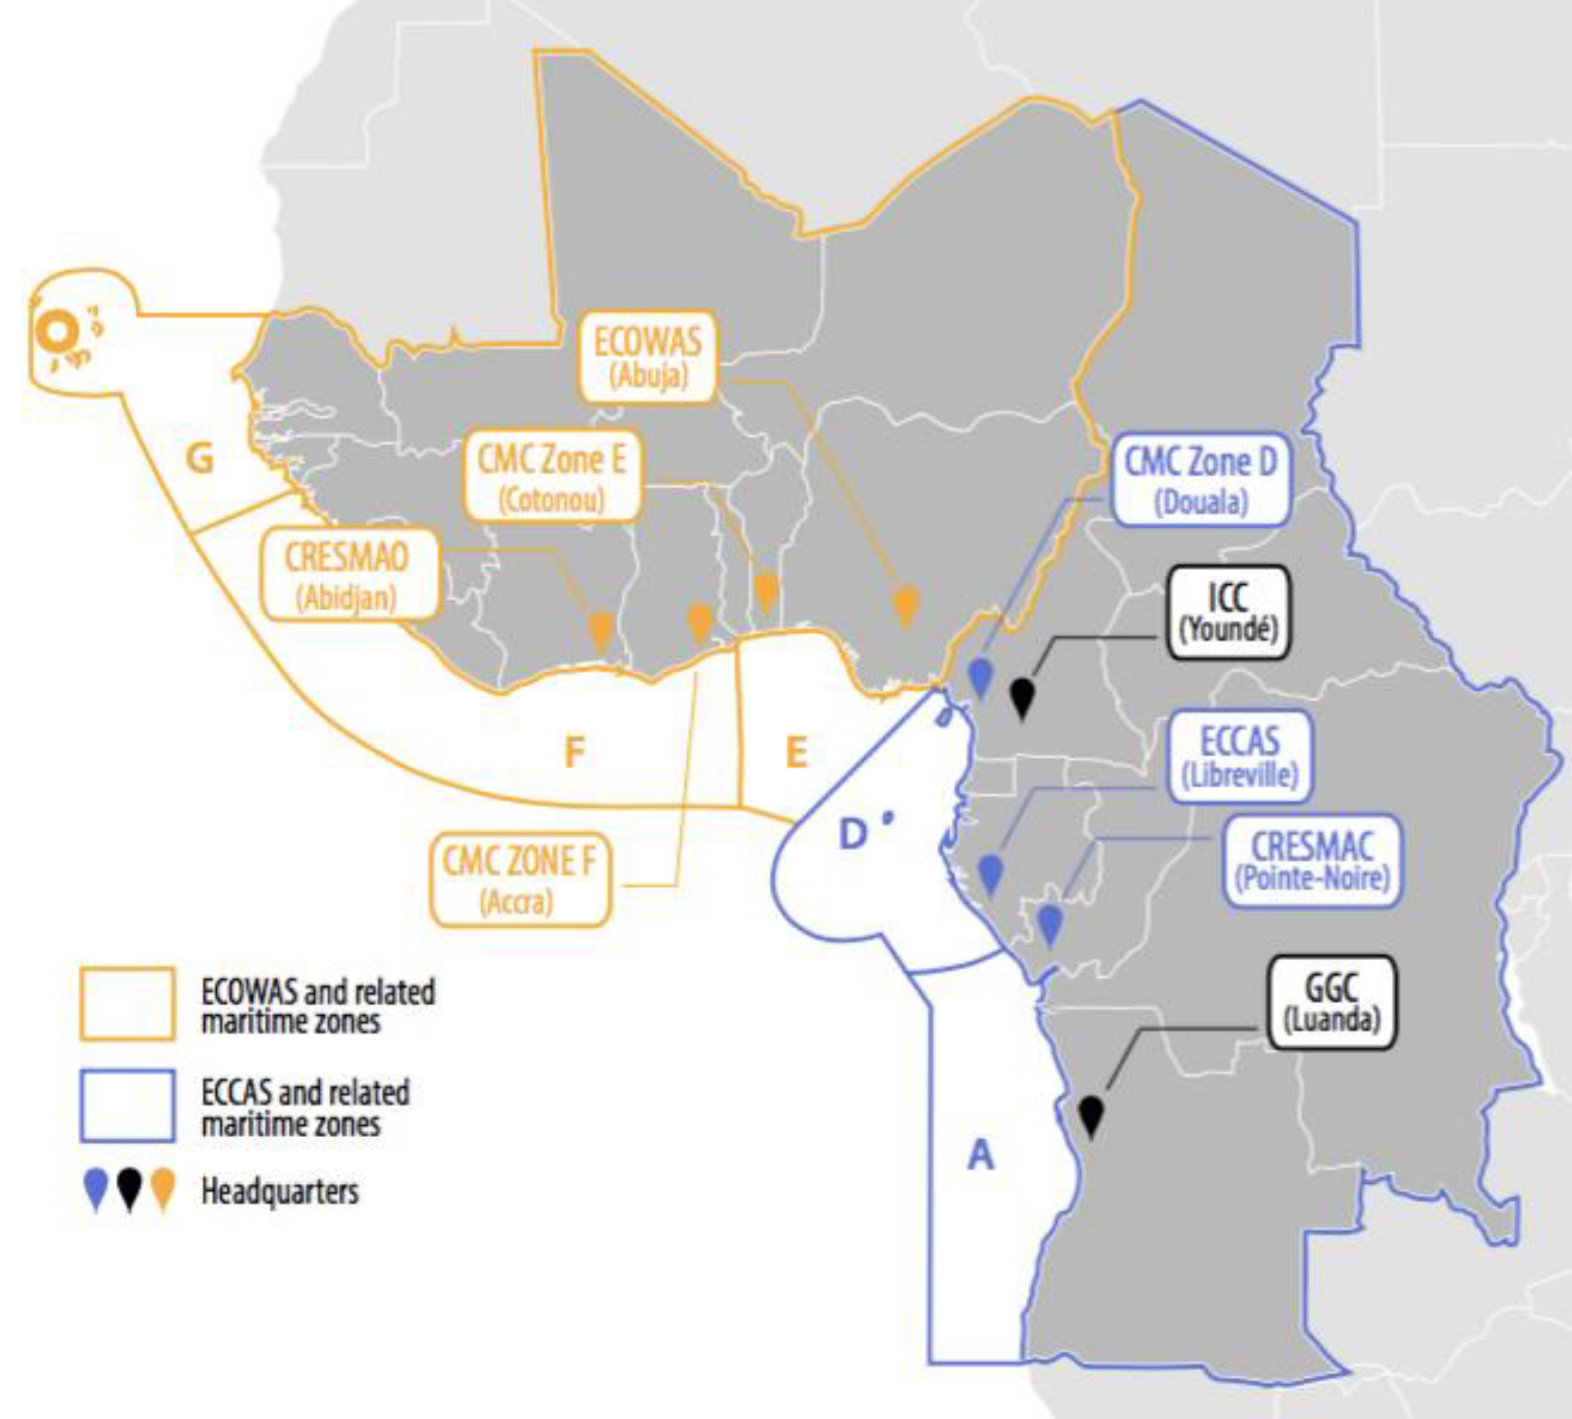 ICC and CMC Gulf of Guinea outline with ECOWAS, ECCAS, and related maritime zones